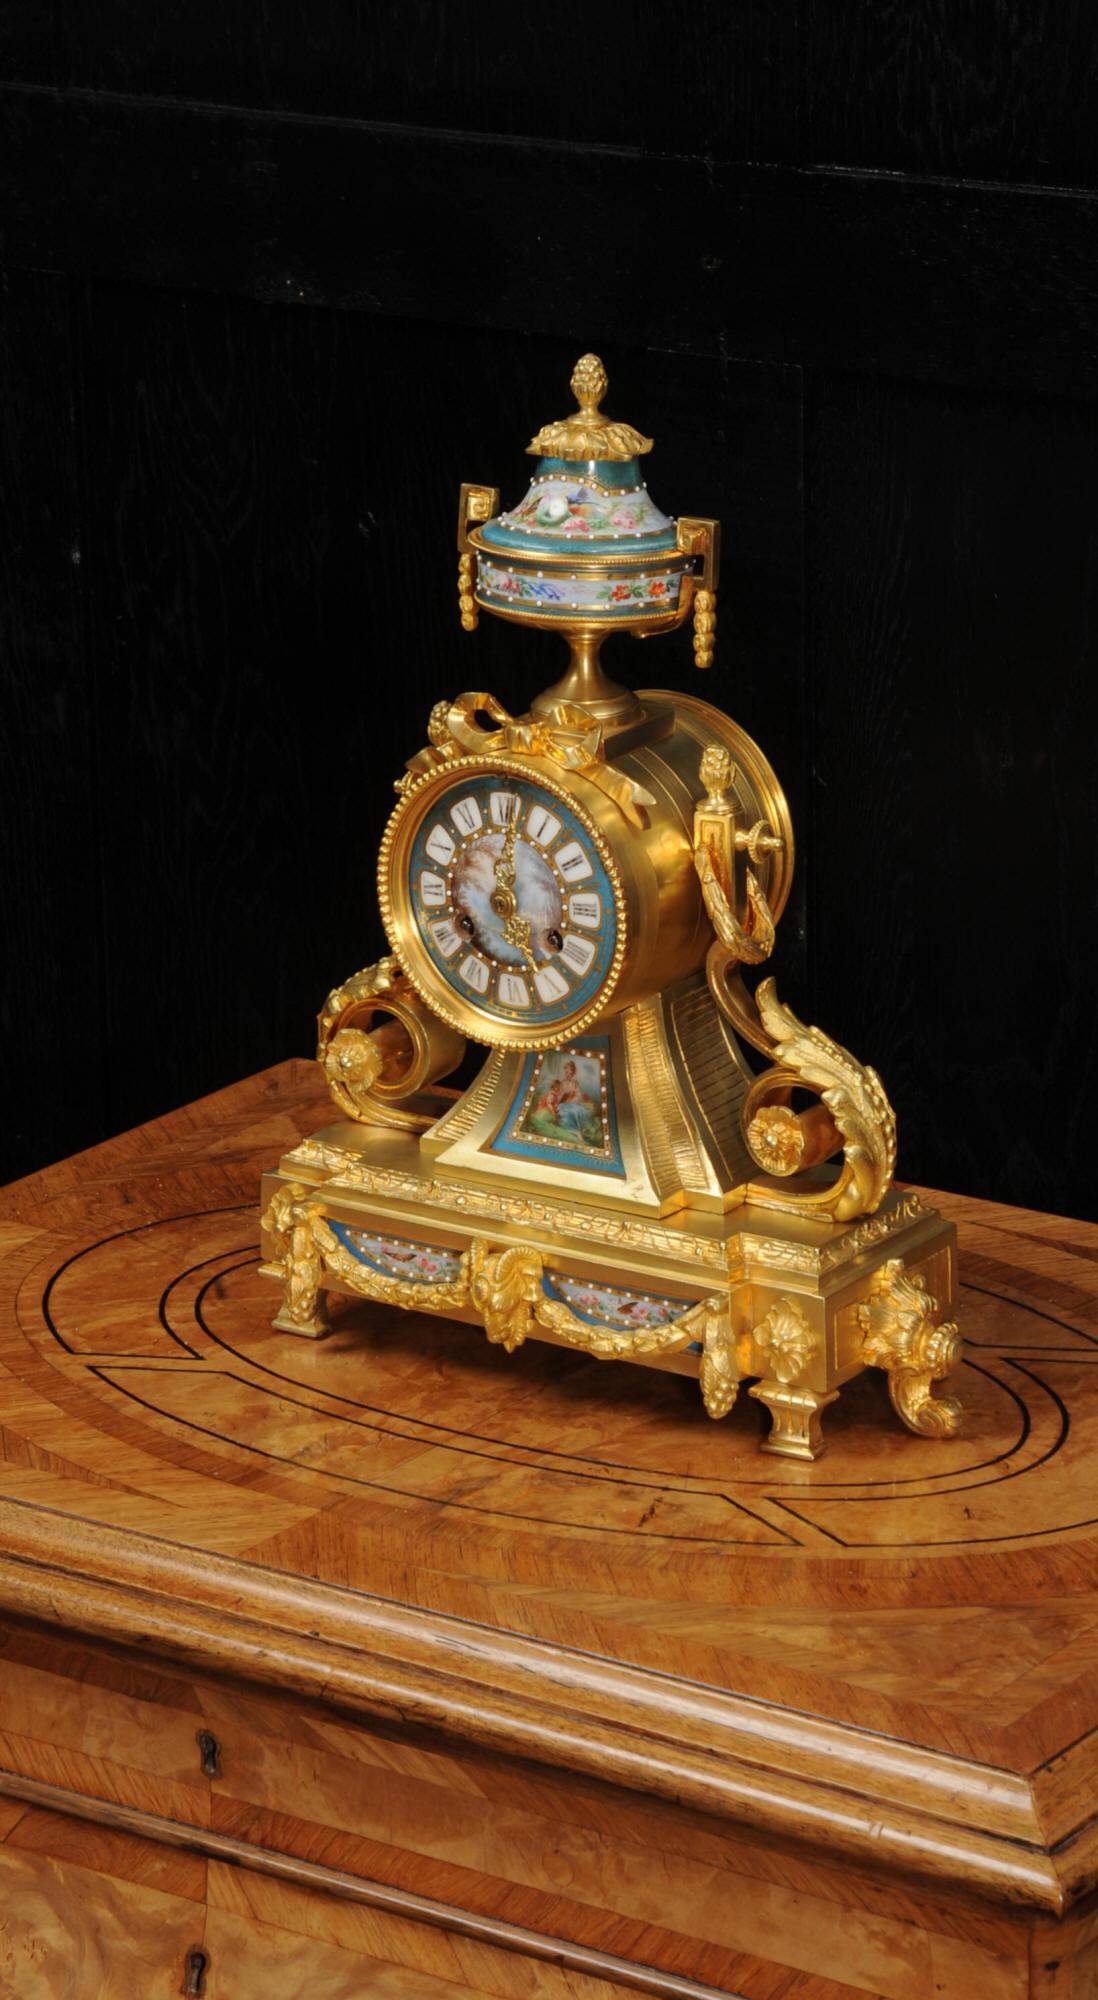 A superb clock by the illustrious clockmaker Le Roy et Fils of Paris, circa 1860. The crisp ormolu (finely gilded bronze), beautifully modelled and chased, is mounted with exquisite Sèvres style porcelain. Porcelain has a turquoise ground and is